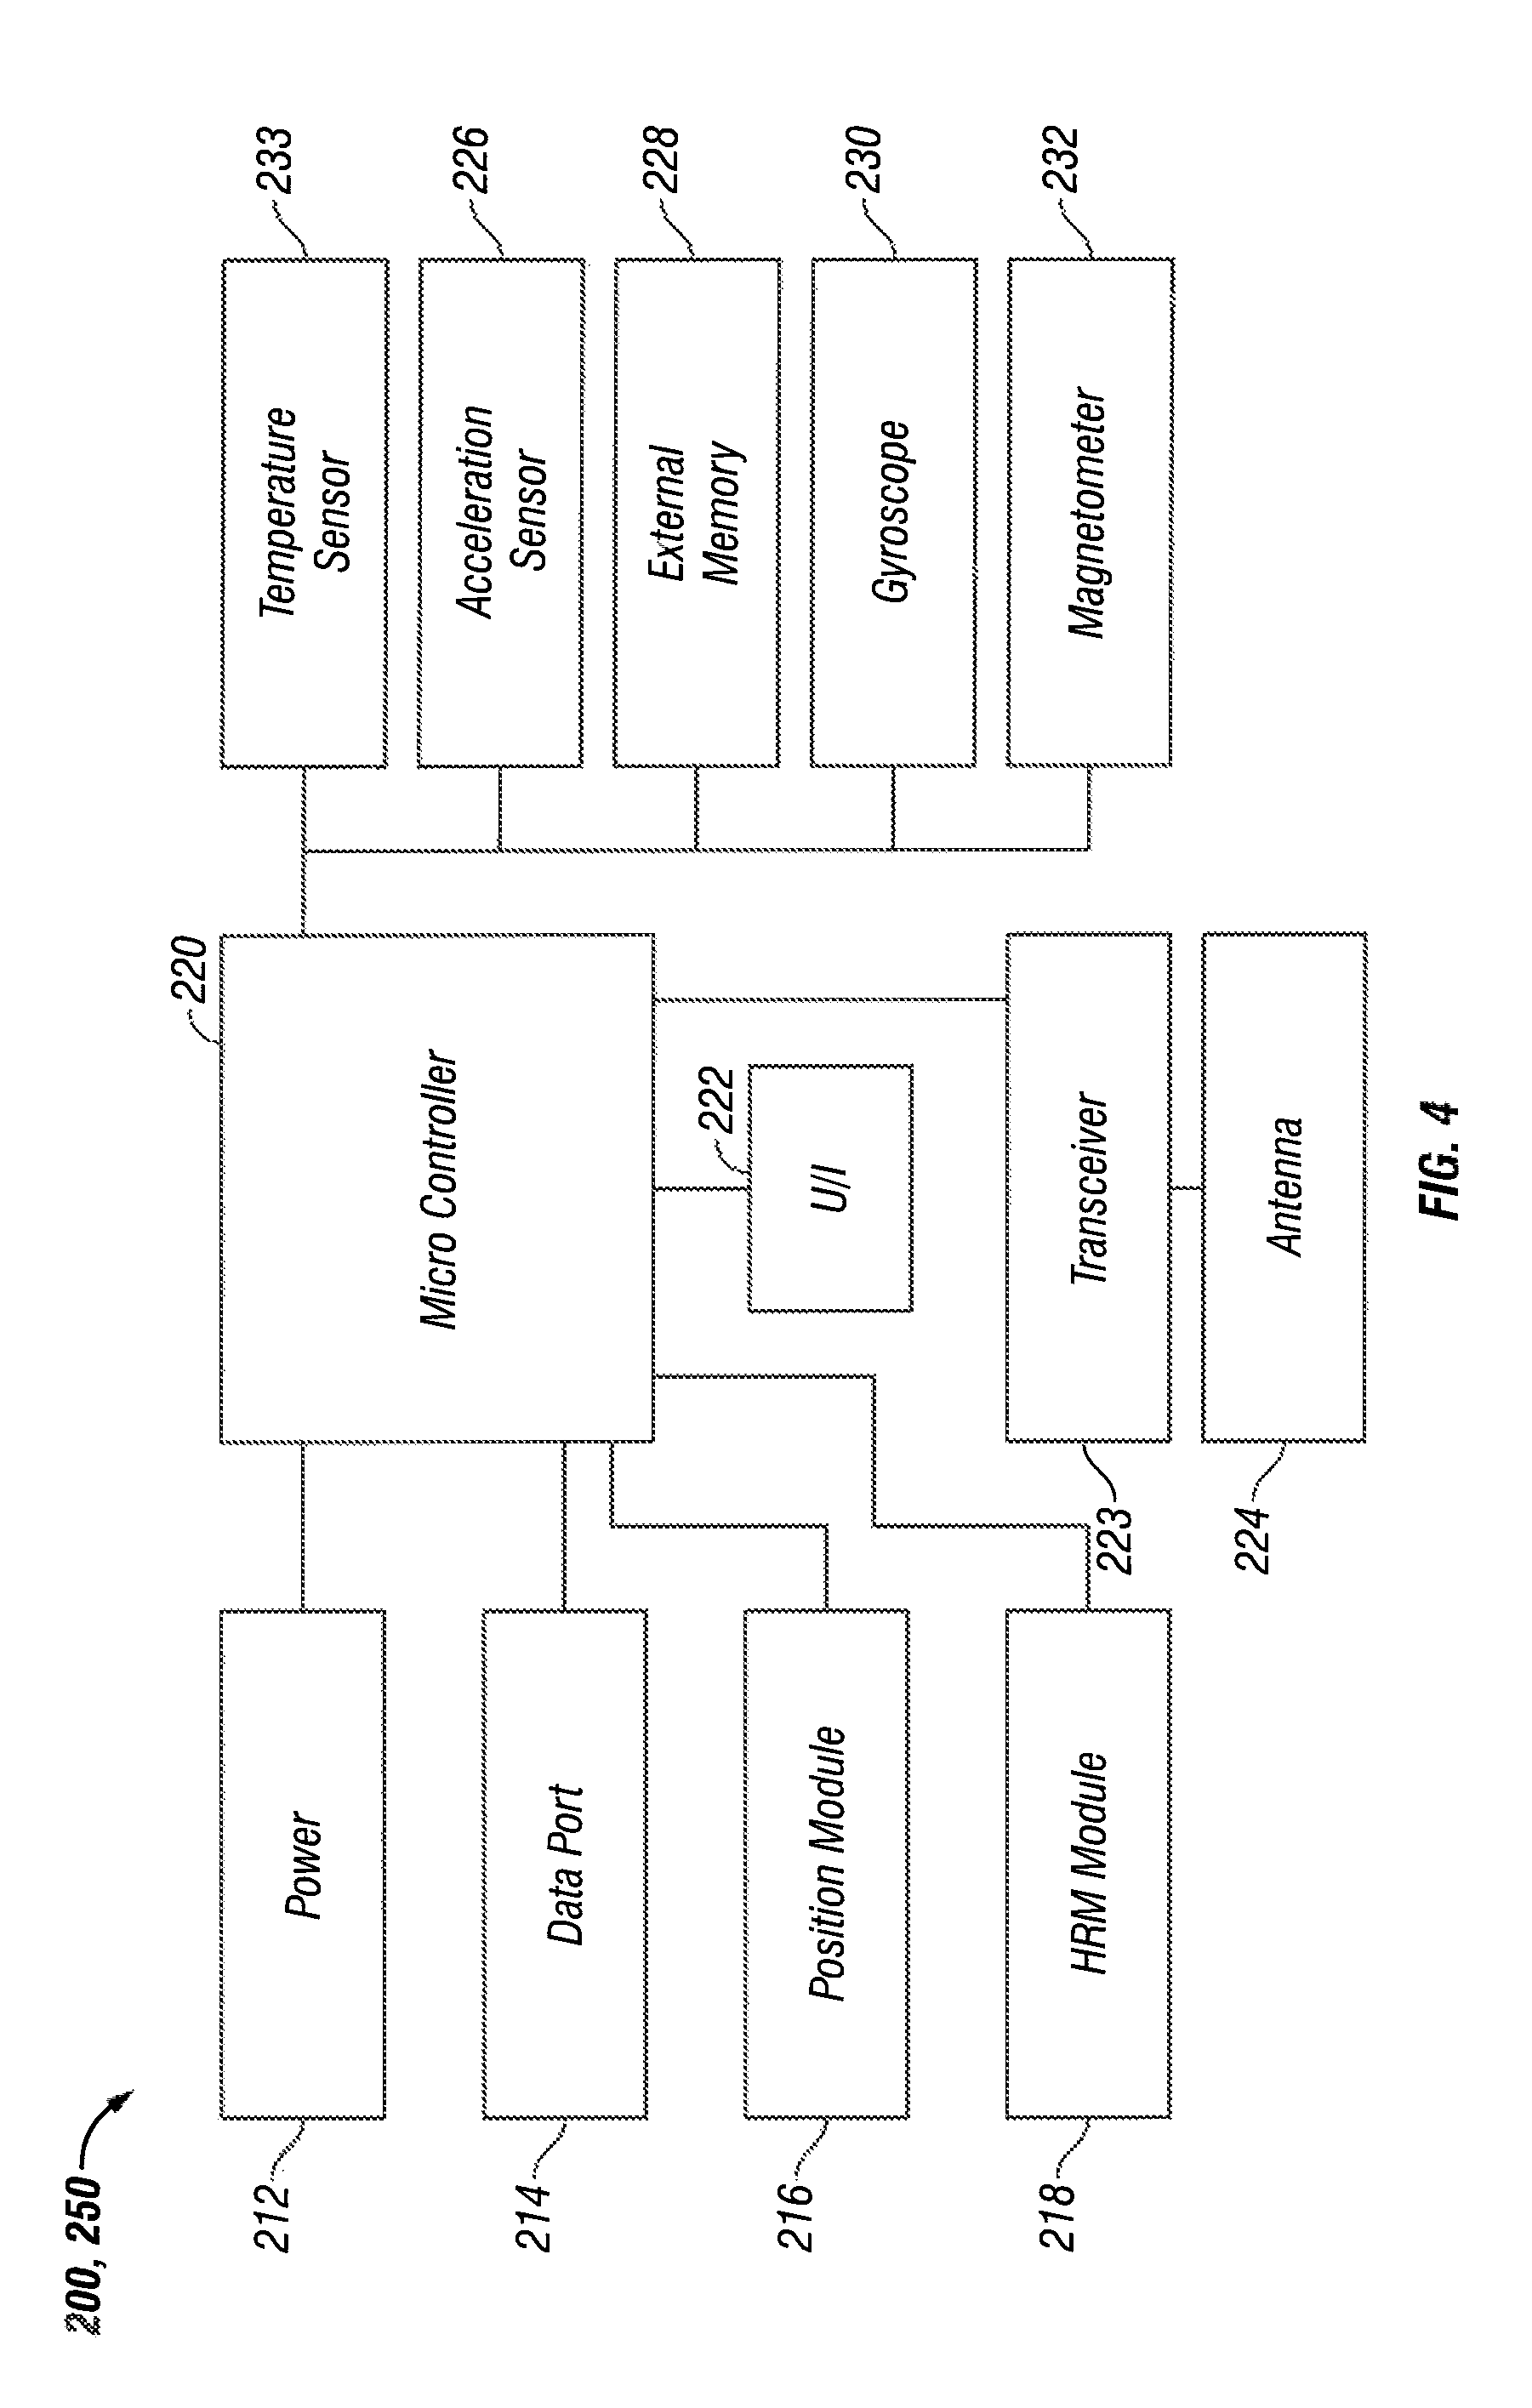 Group performance monitoring system and method